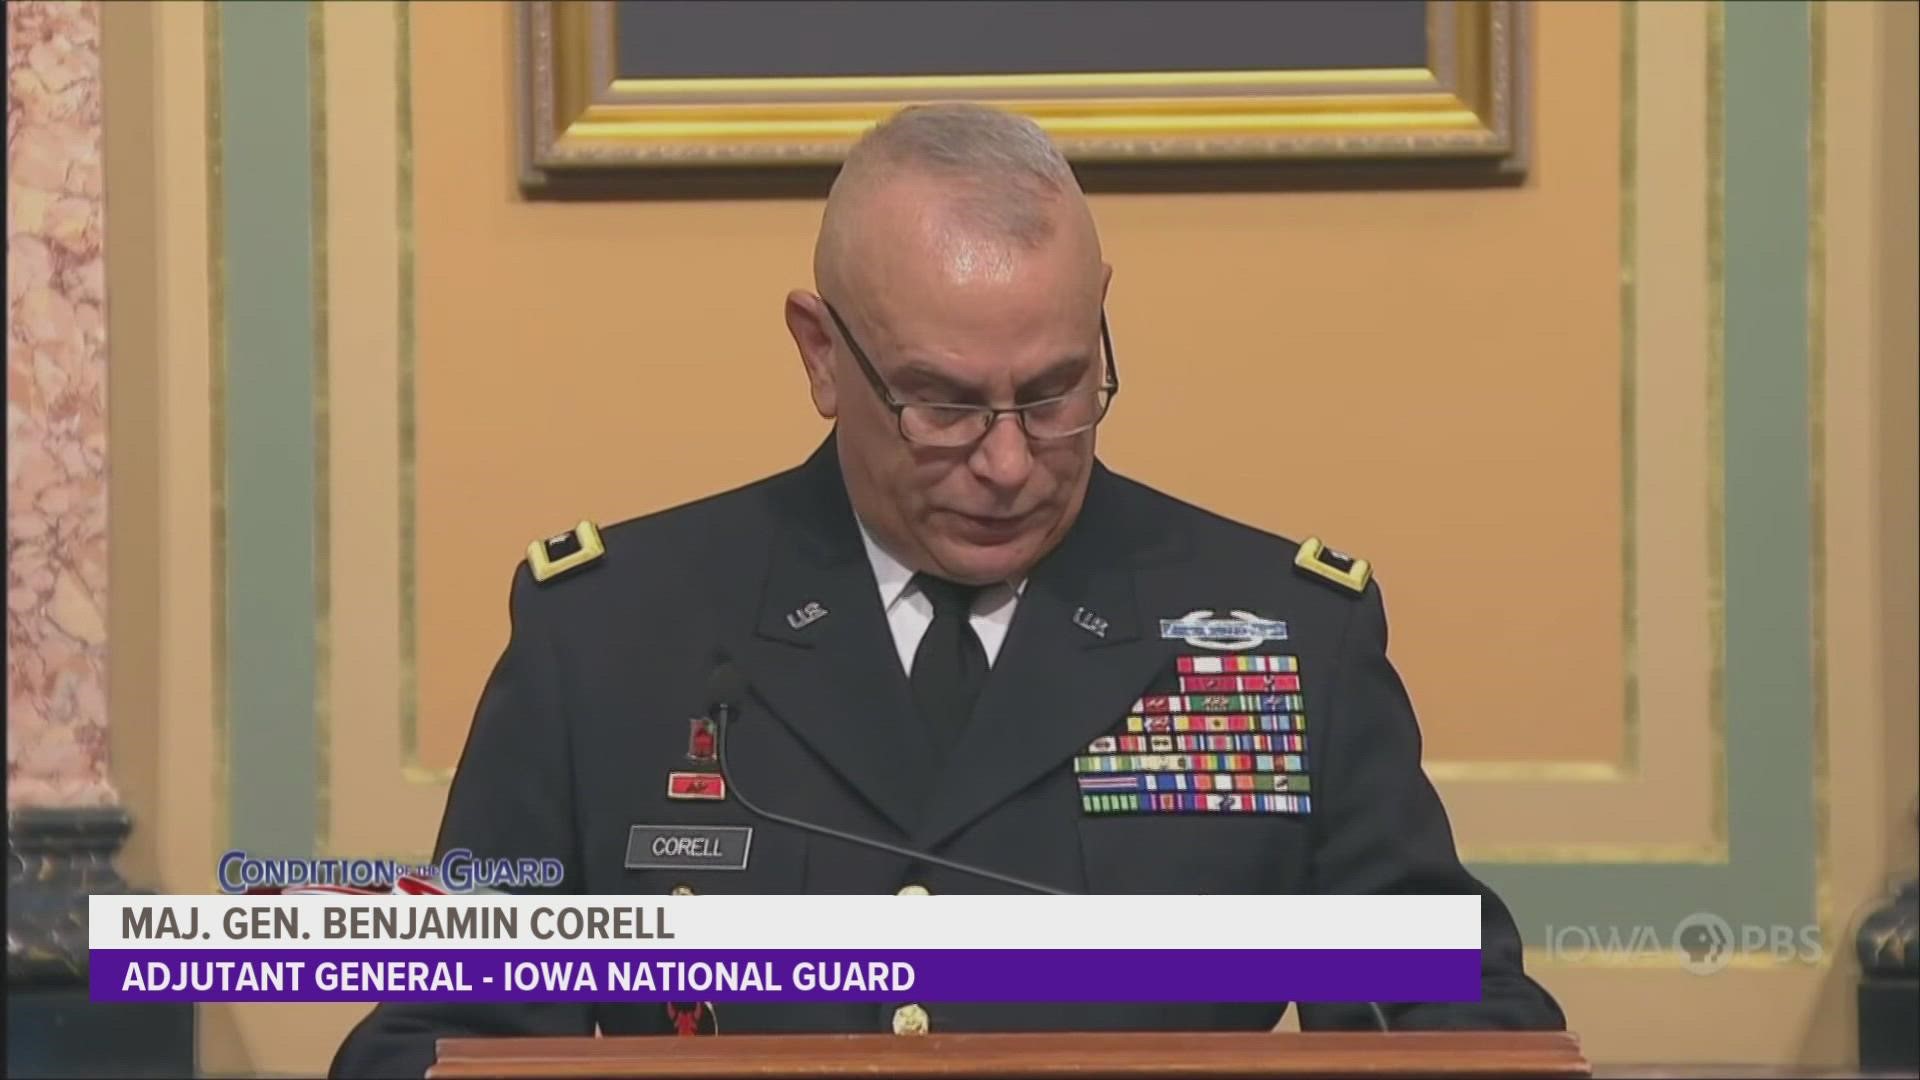 The head of Iowa's National Guard addressed a joint session of Iowa's state legislature. Correll focused on how the guard has served our country since 9/11.